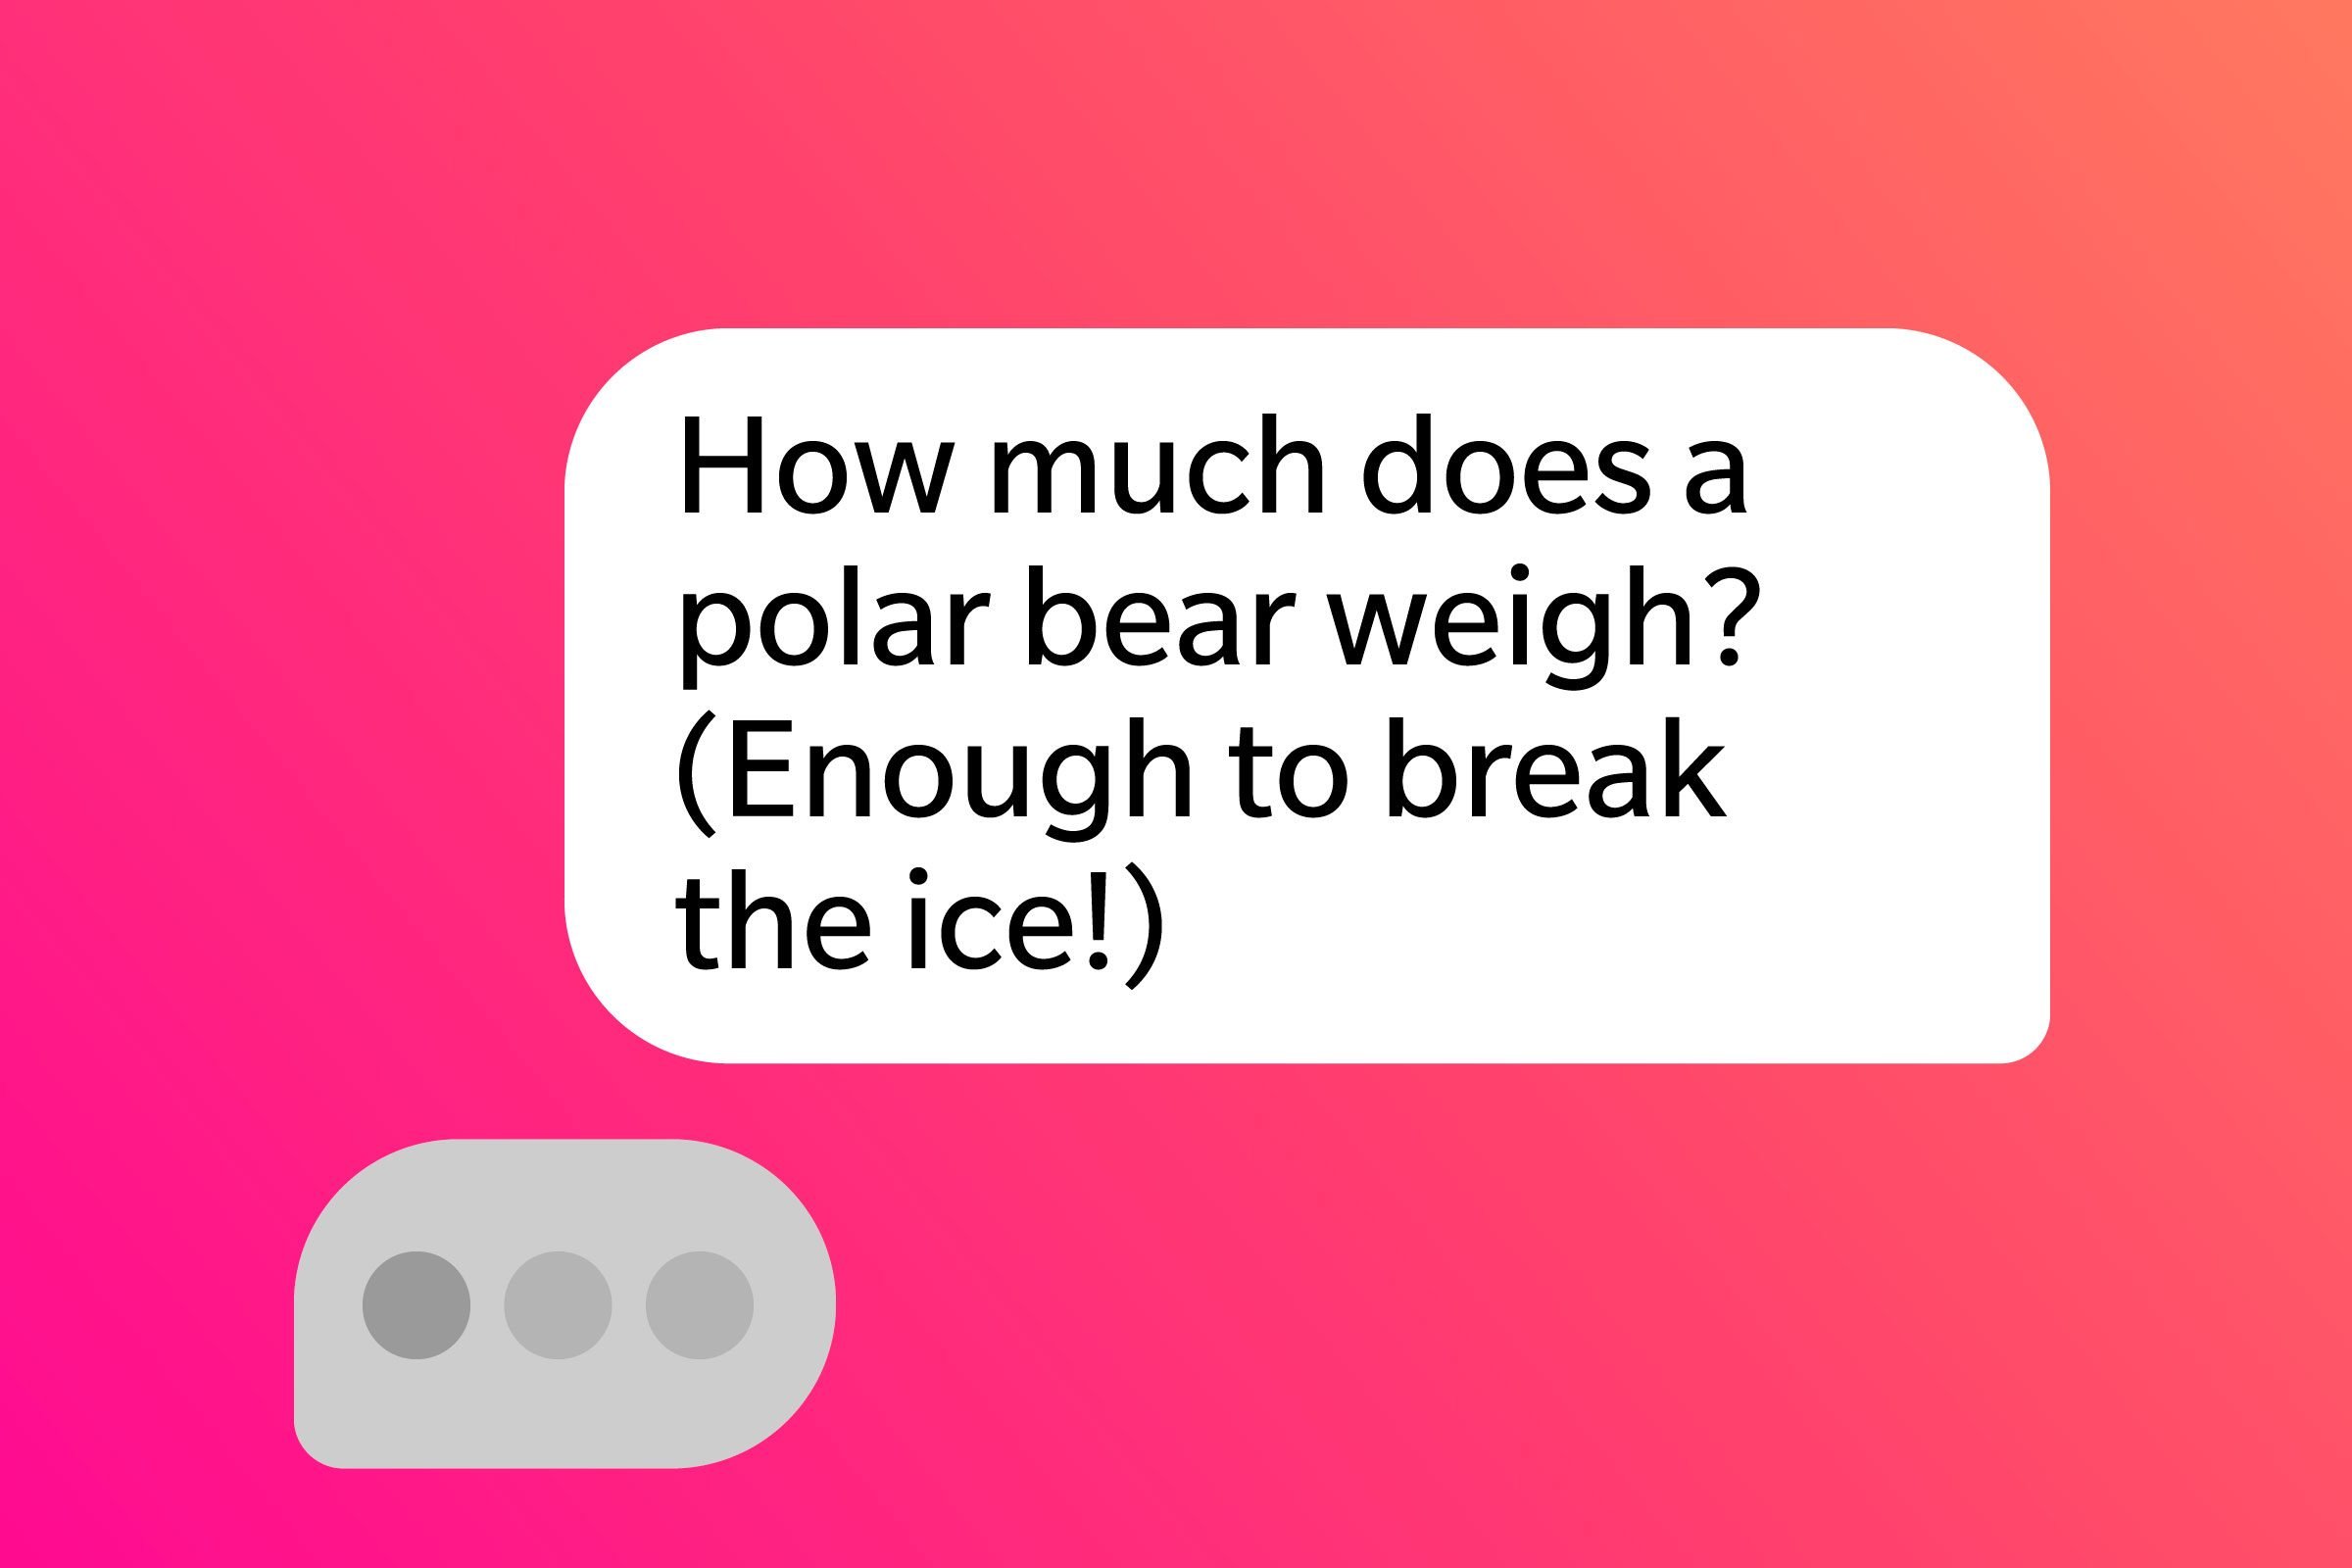 16 Tinder Icebreakers to Start a Great Conversation